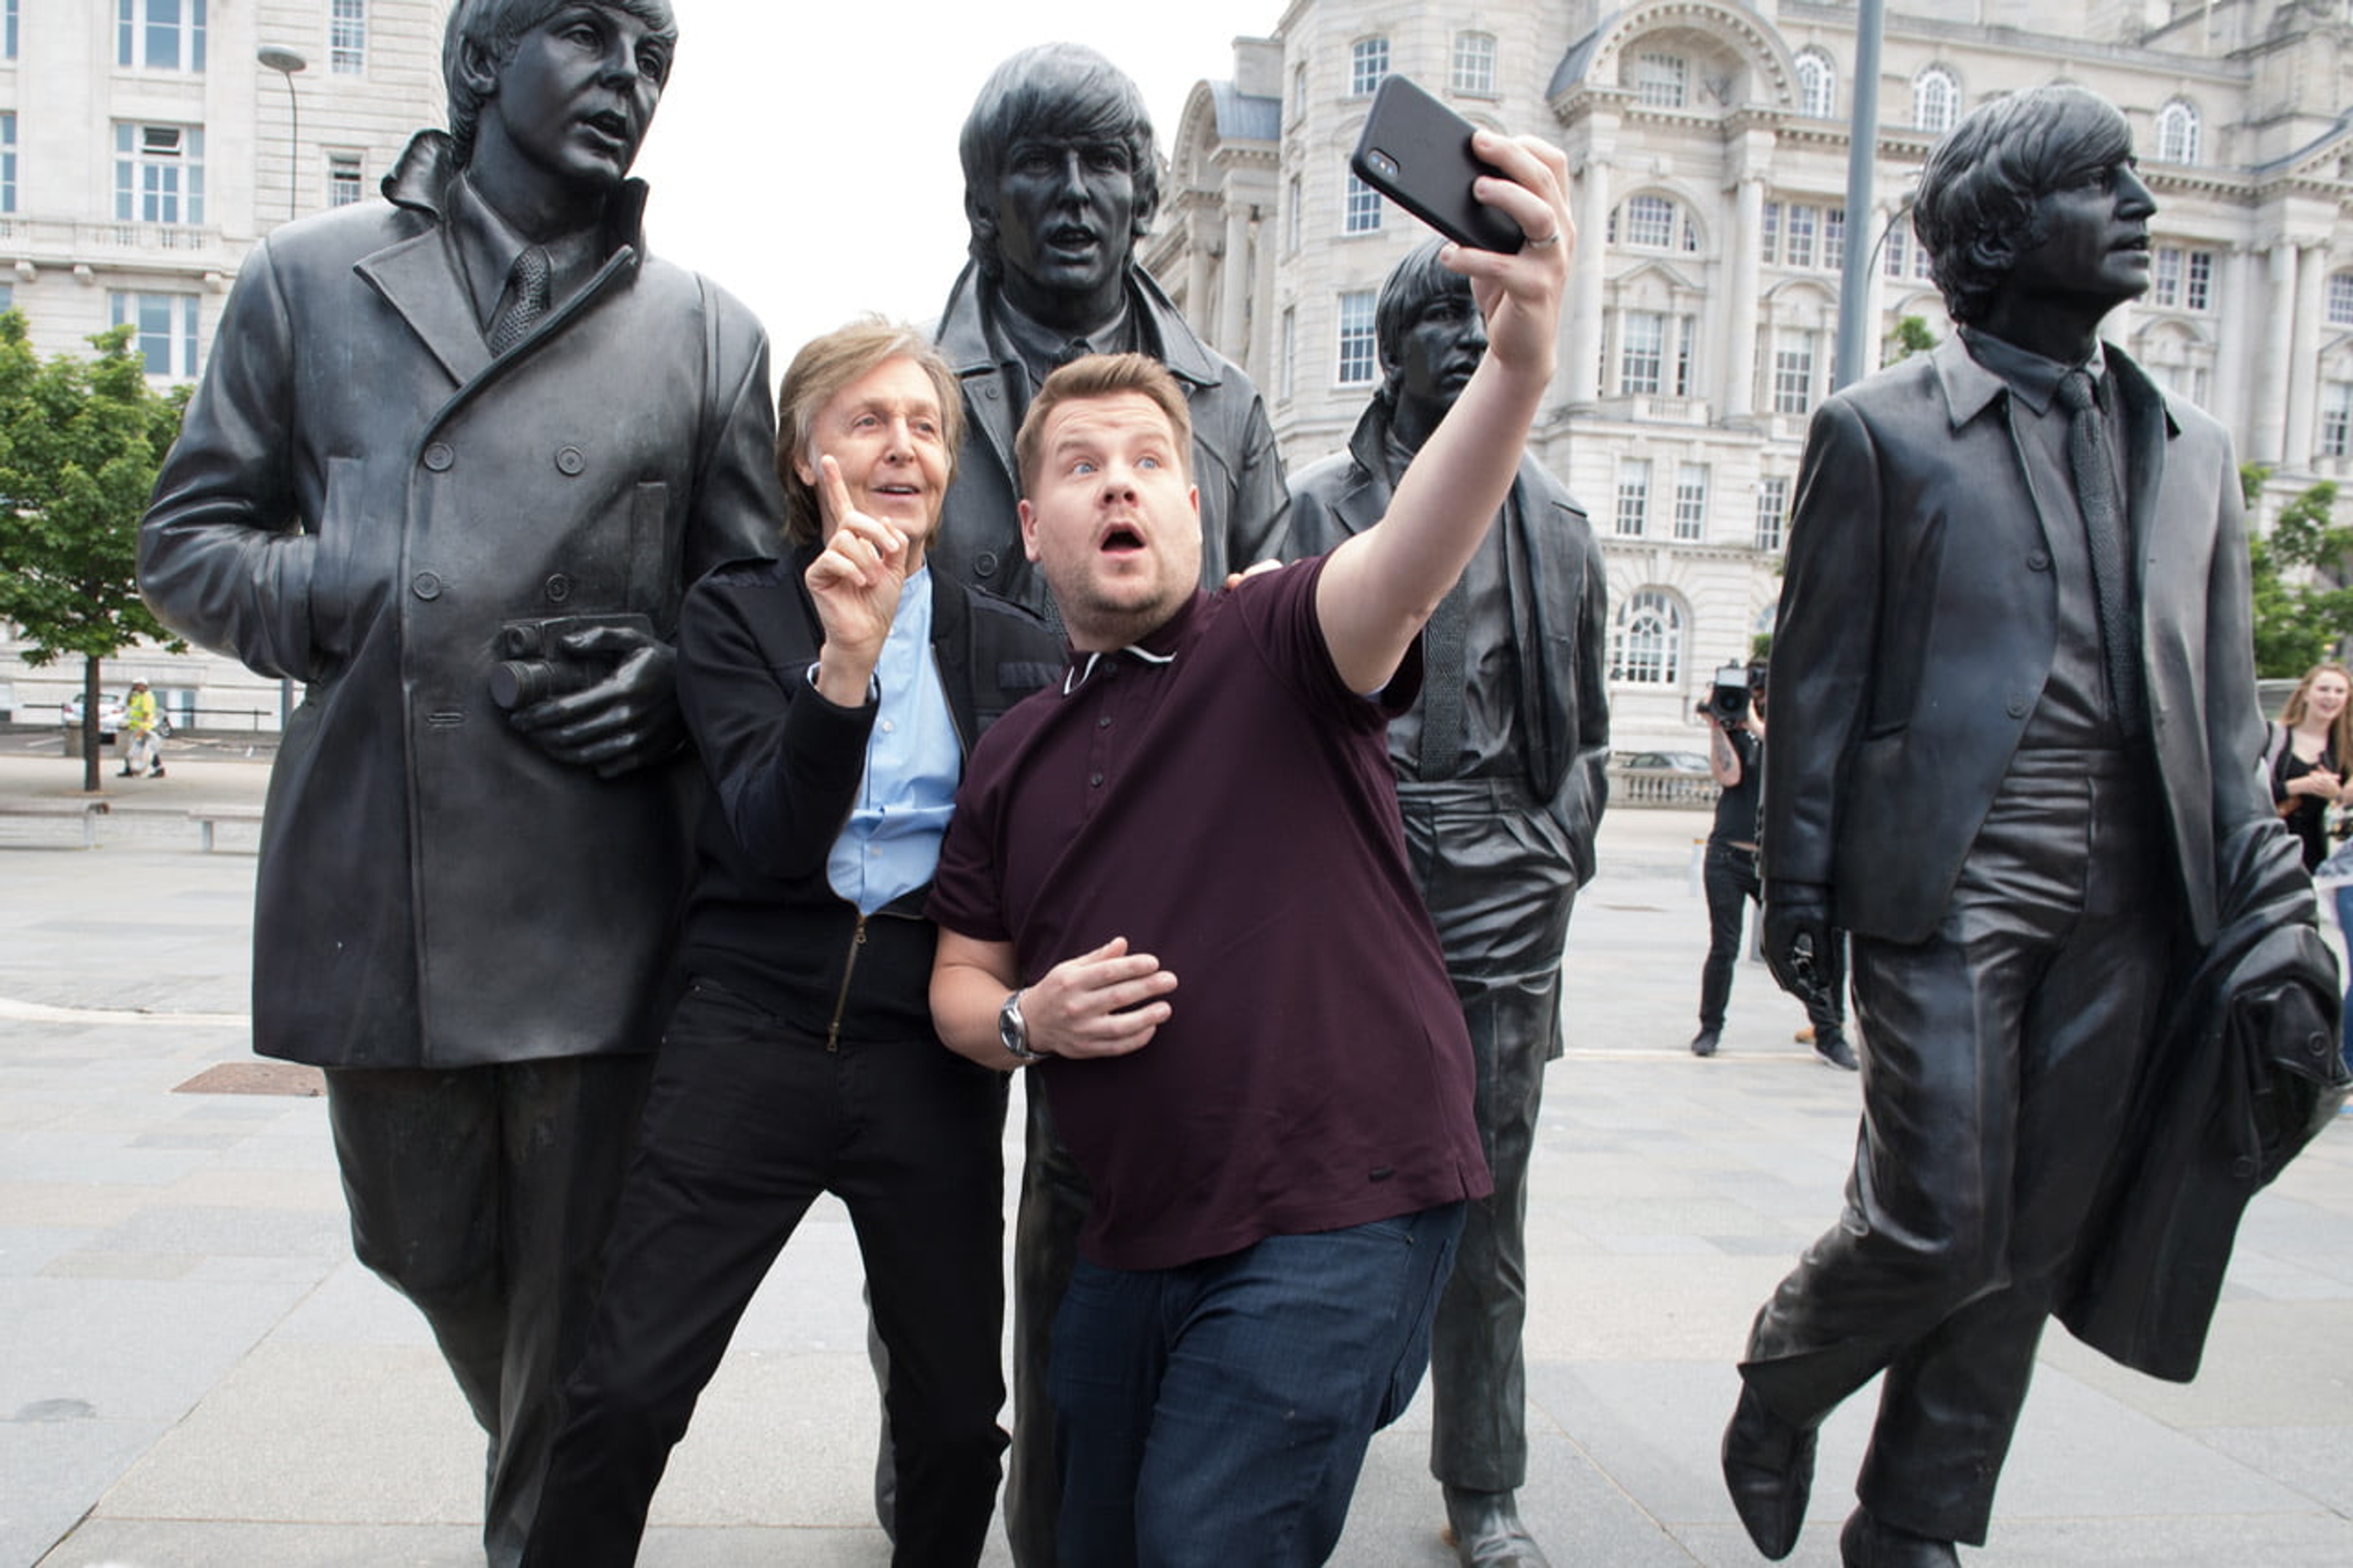 Photo of Paul and James Corden filming Carpool Karaoke in Liverpool next to The Beatles statues